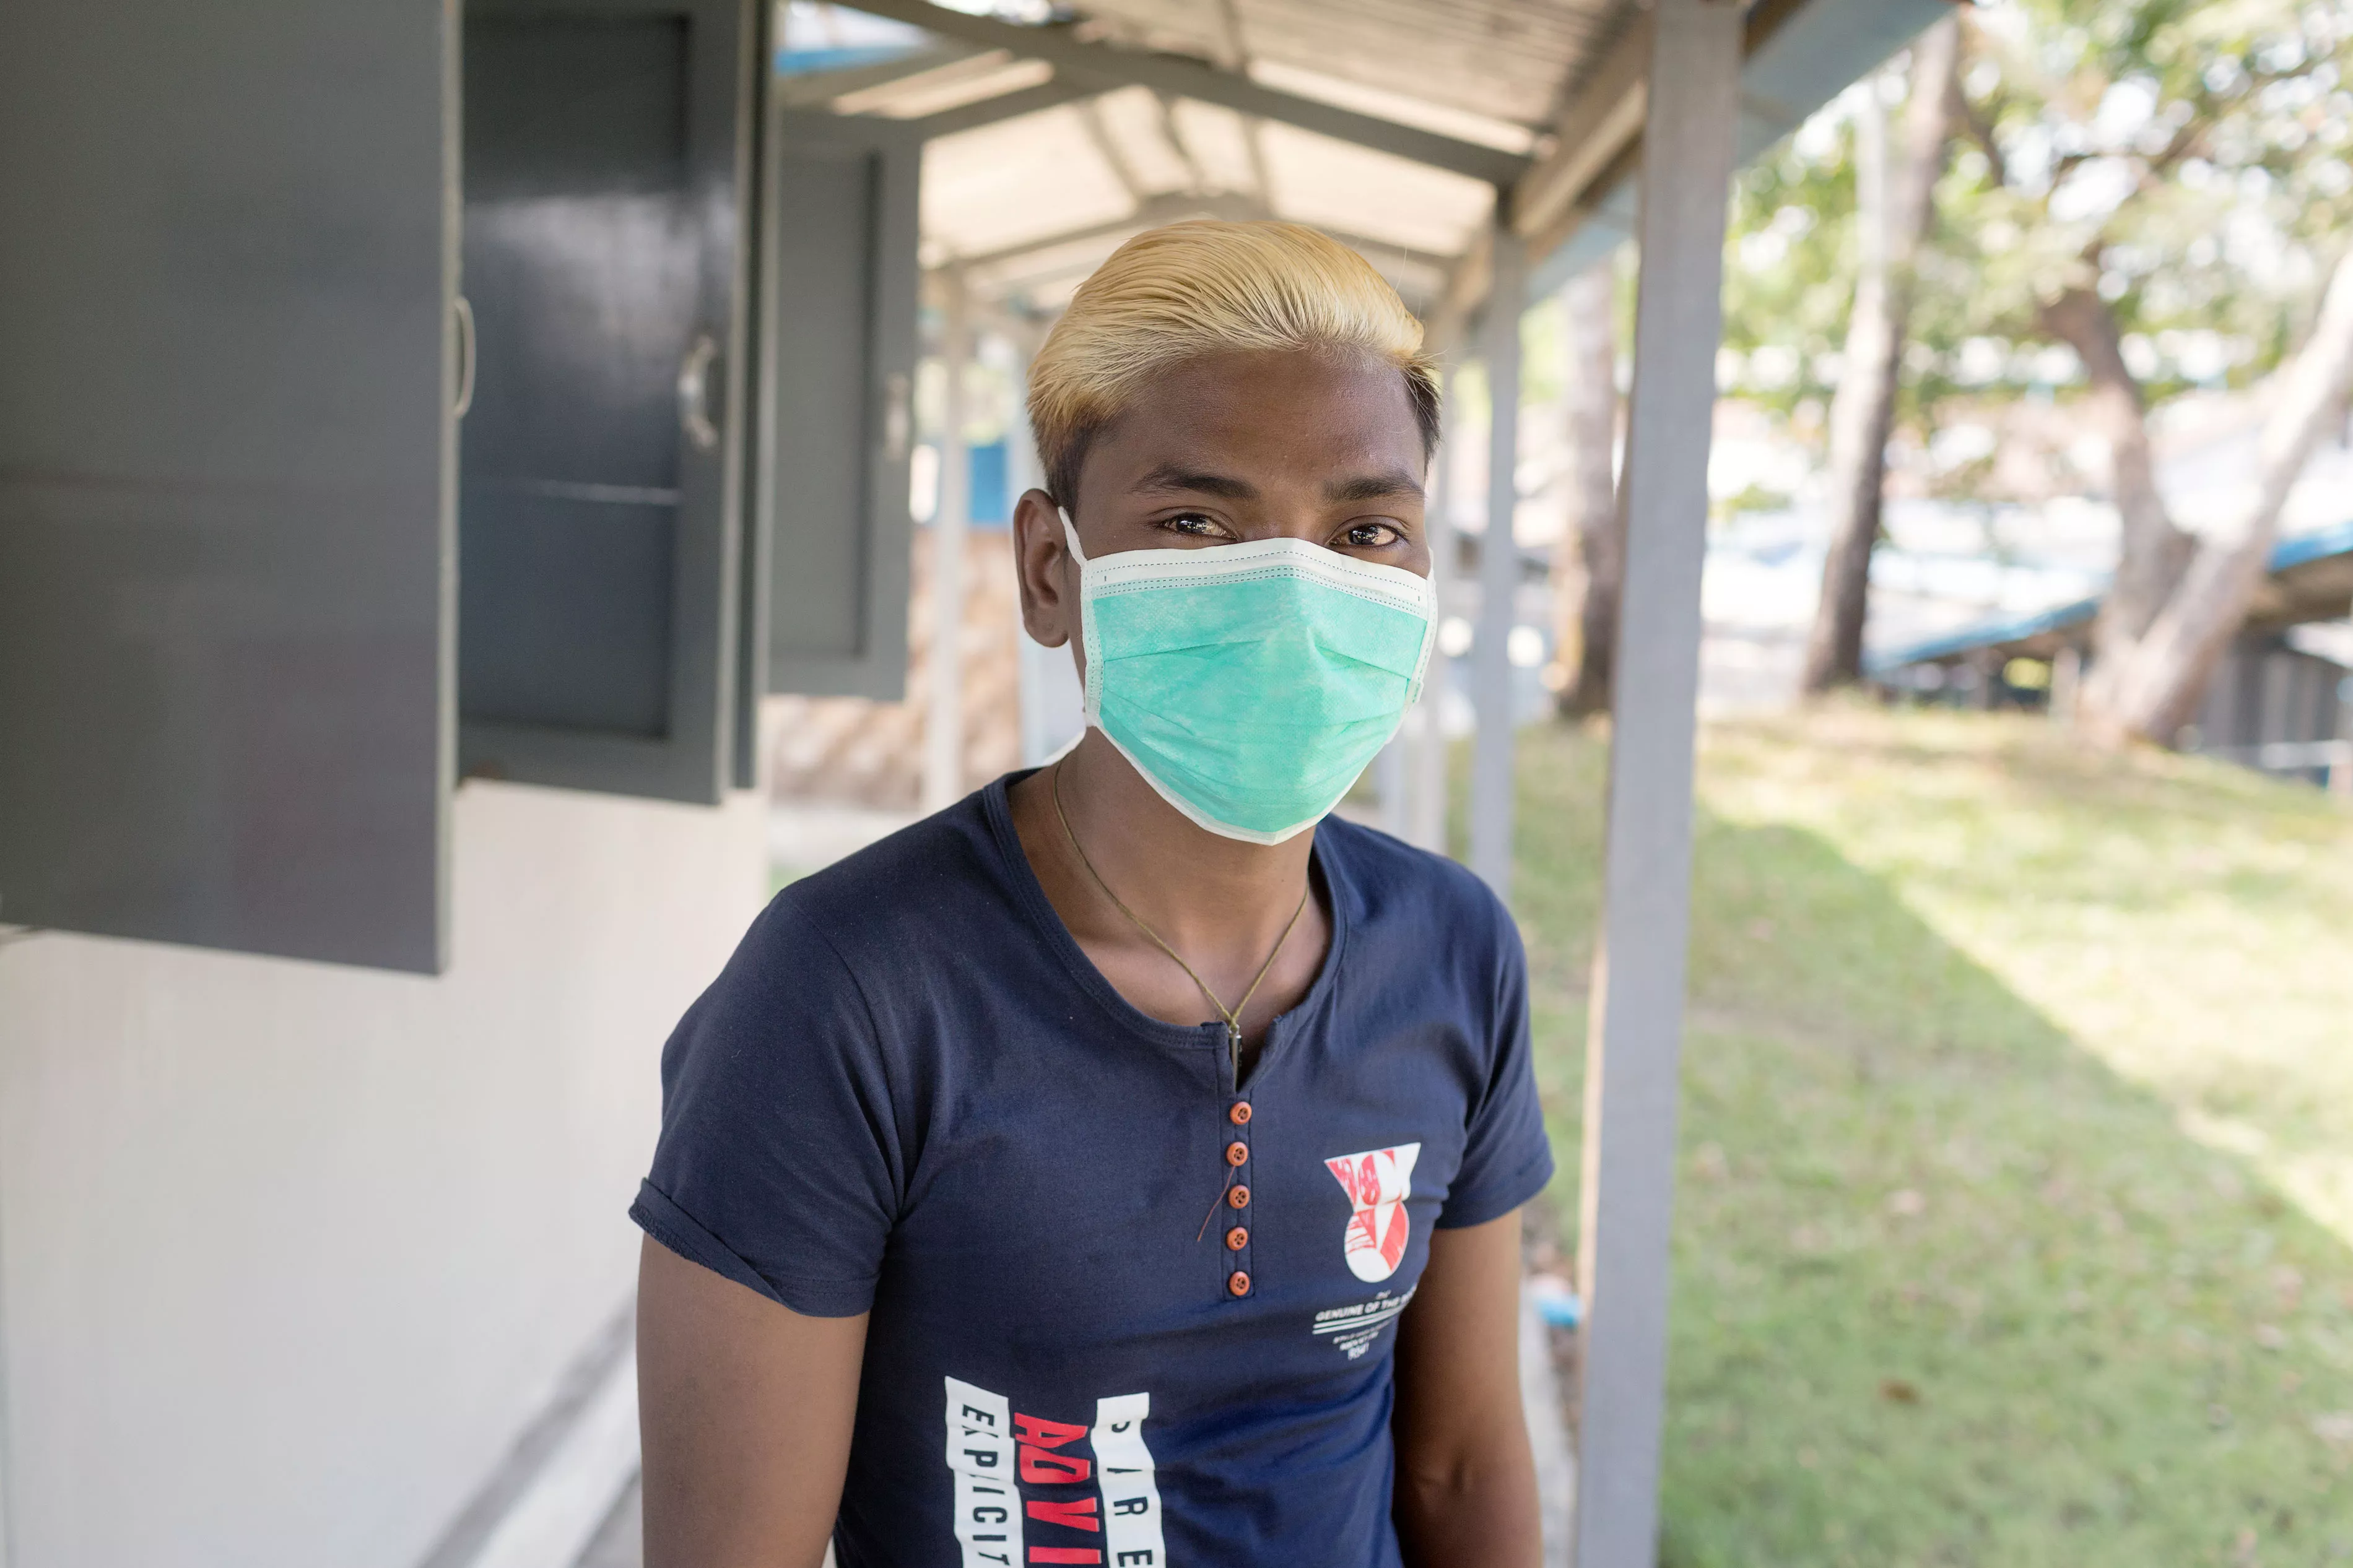 Kyaw Thu is 26 years old. 5 months ago, he went to the clinic at Thon because his body temperature was very high but he felt cold at the same time. There, he tested positive for MDR-TB. Every morning, he wakes up at 7am and travels to the MSF clinic for his medications and his injections.